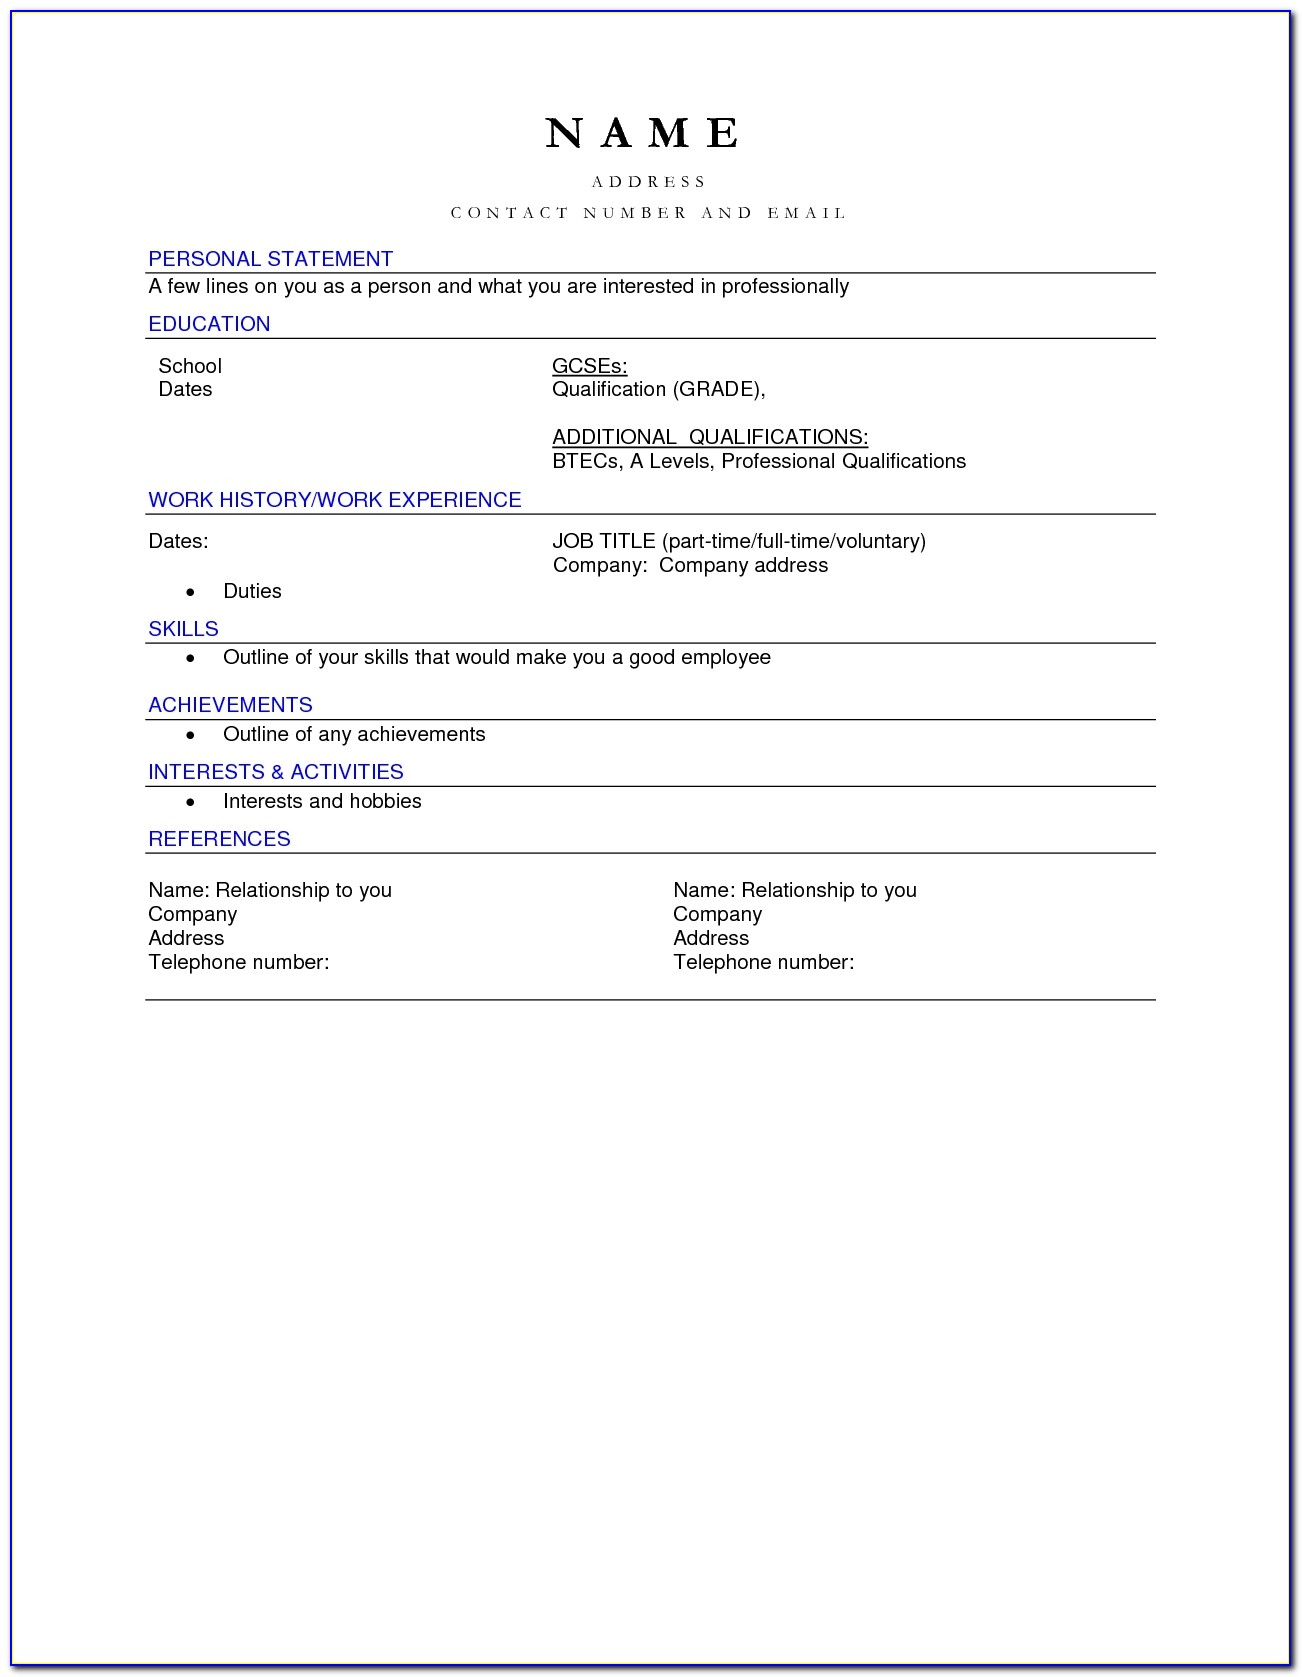 Blank Cv Templates Free Download Blank Cv Template Professional Throughout Free Resume Templates For Mac